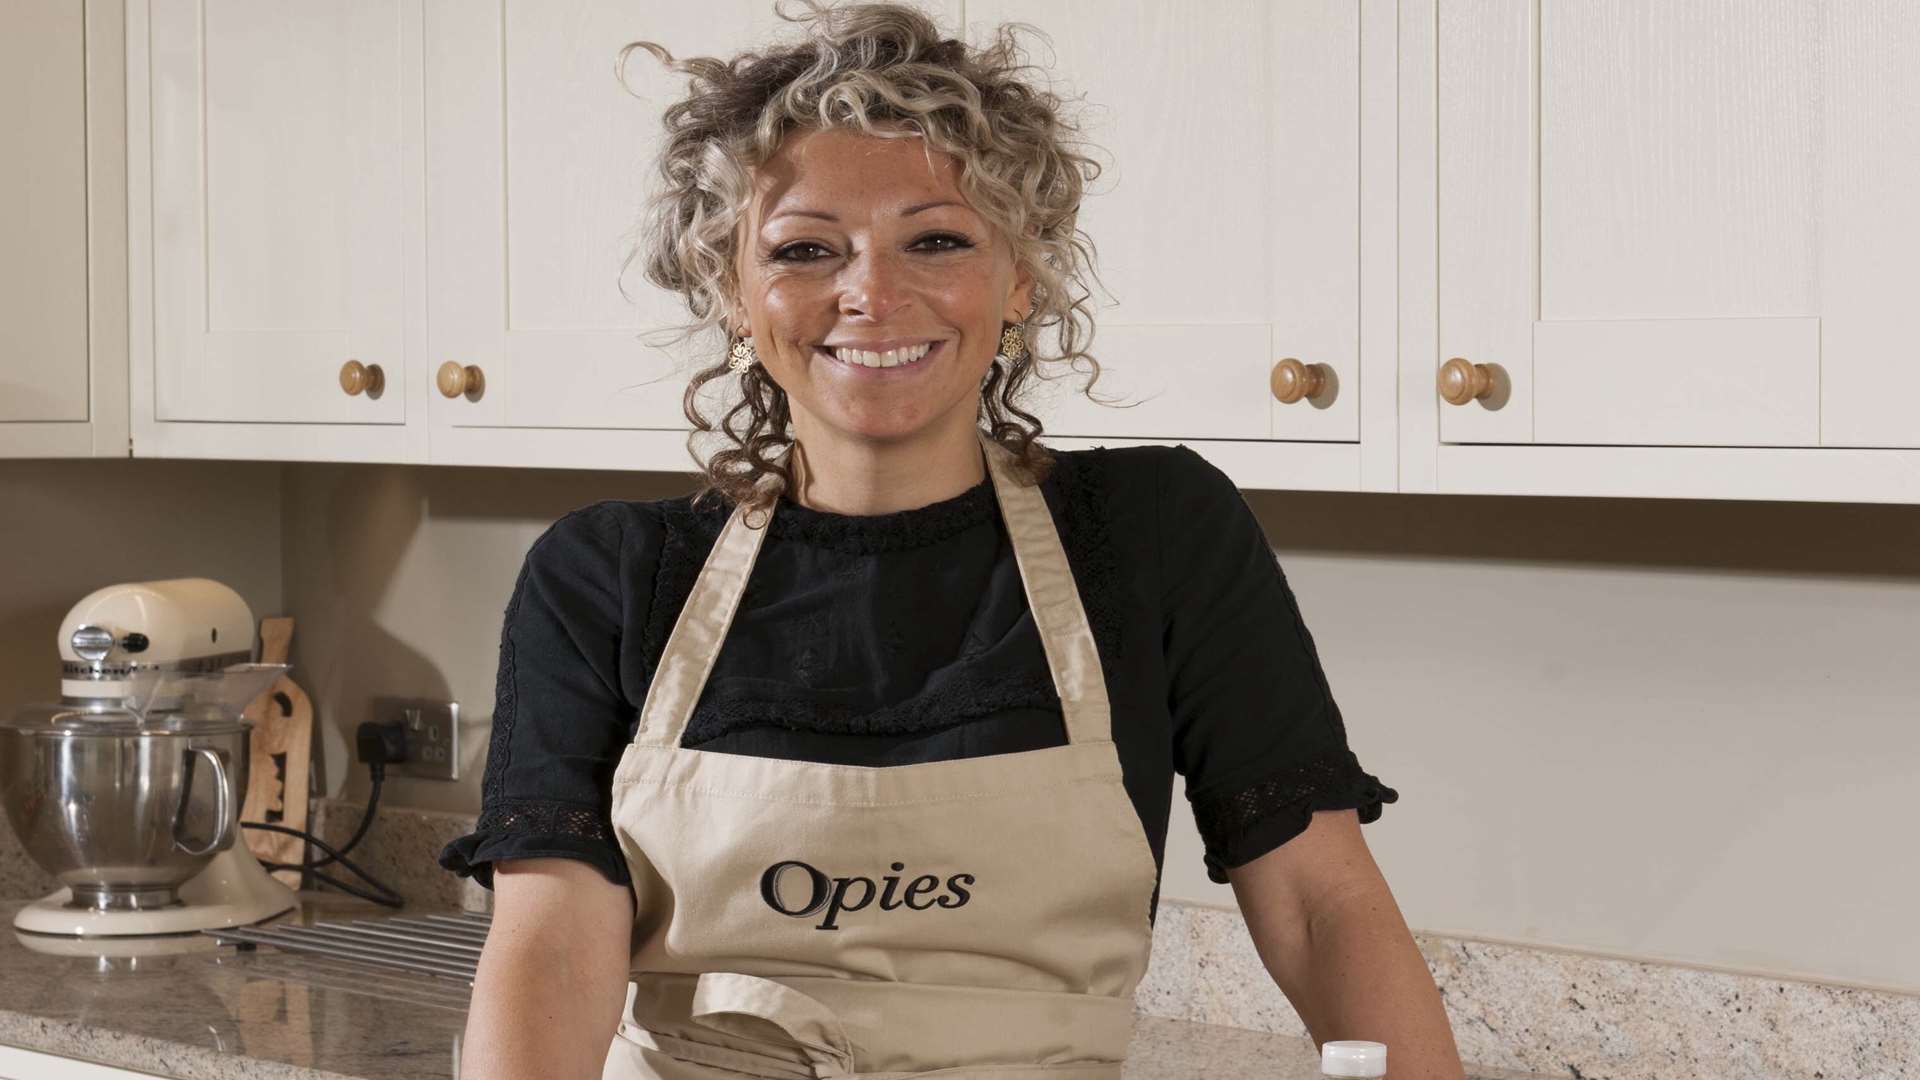 Kate Henry will create a collection of baking recipes using Bennett Opie products